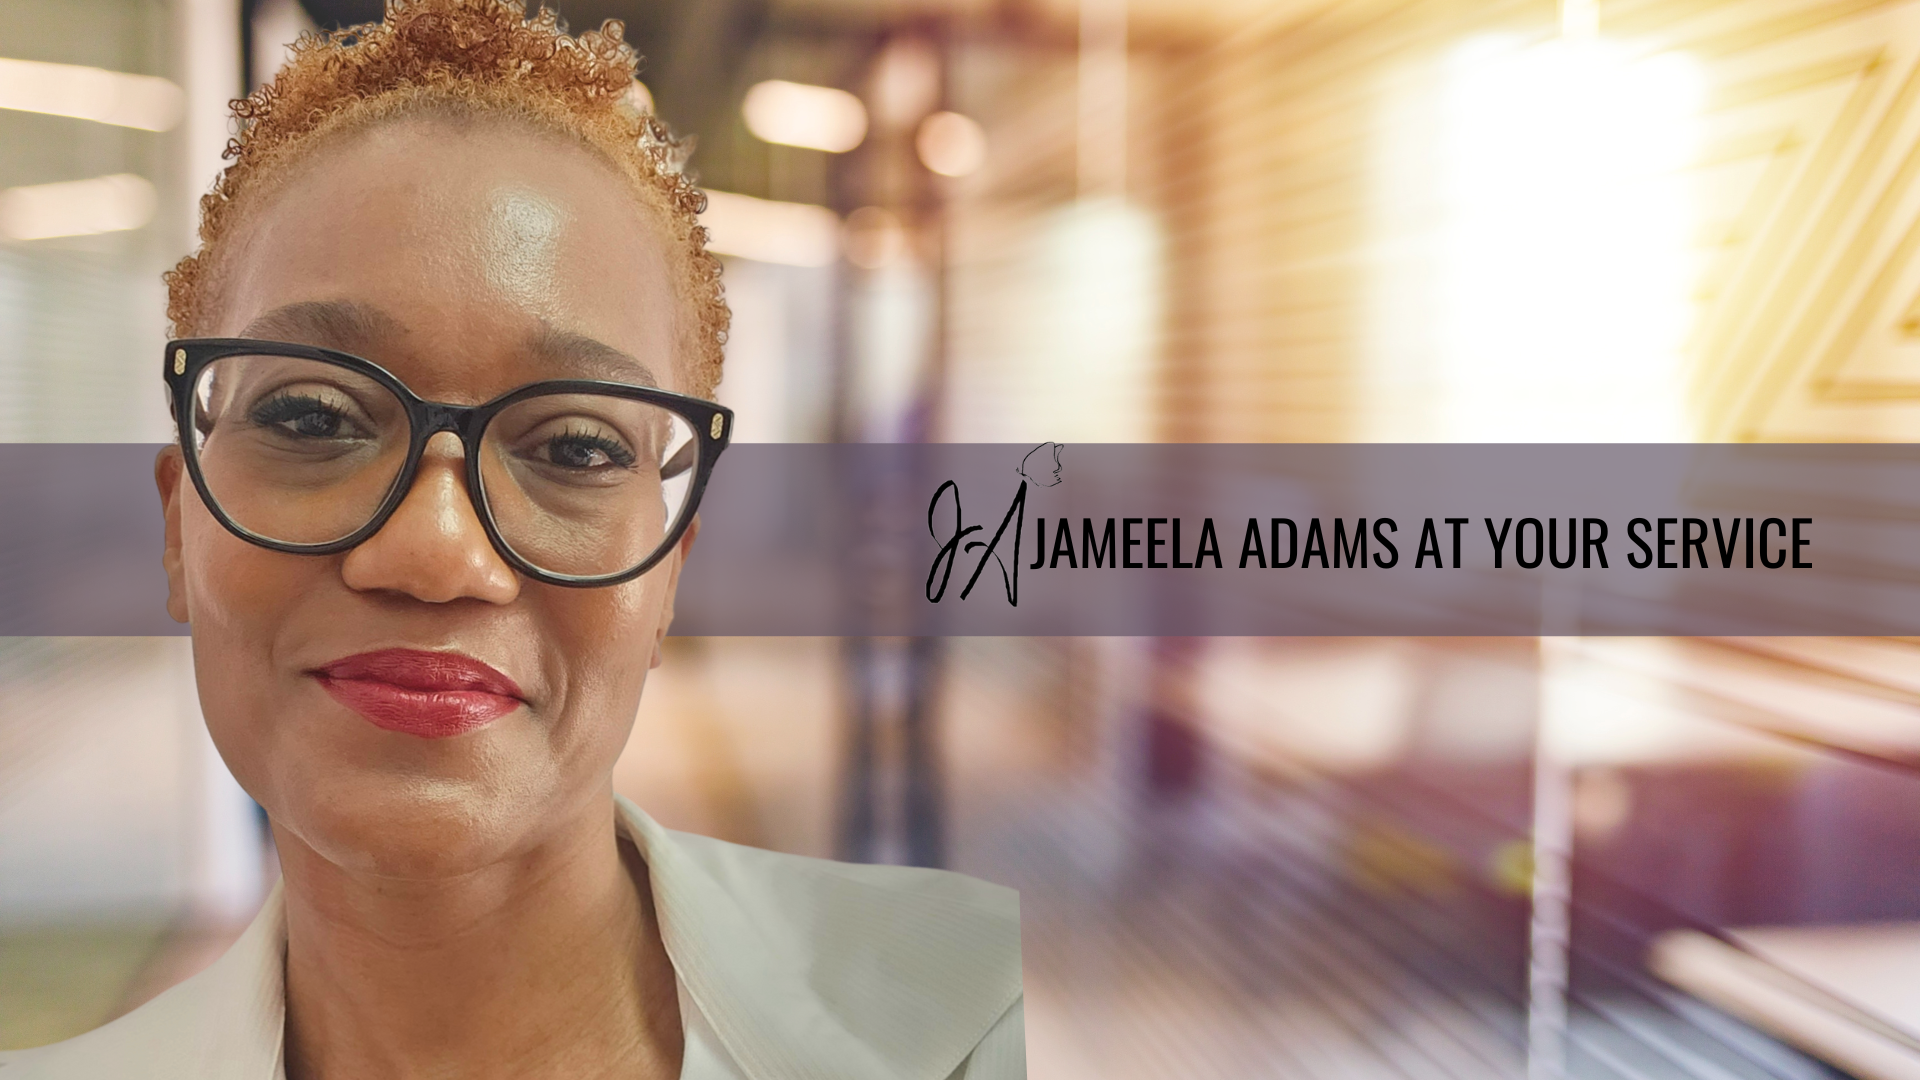 Jameela Adams At Your Service banner